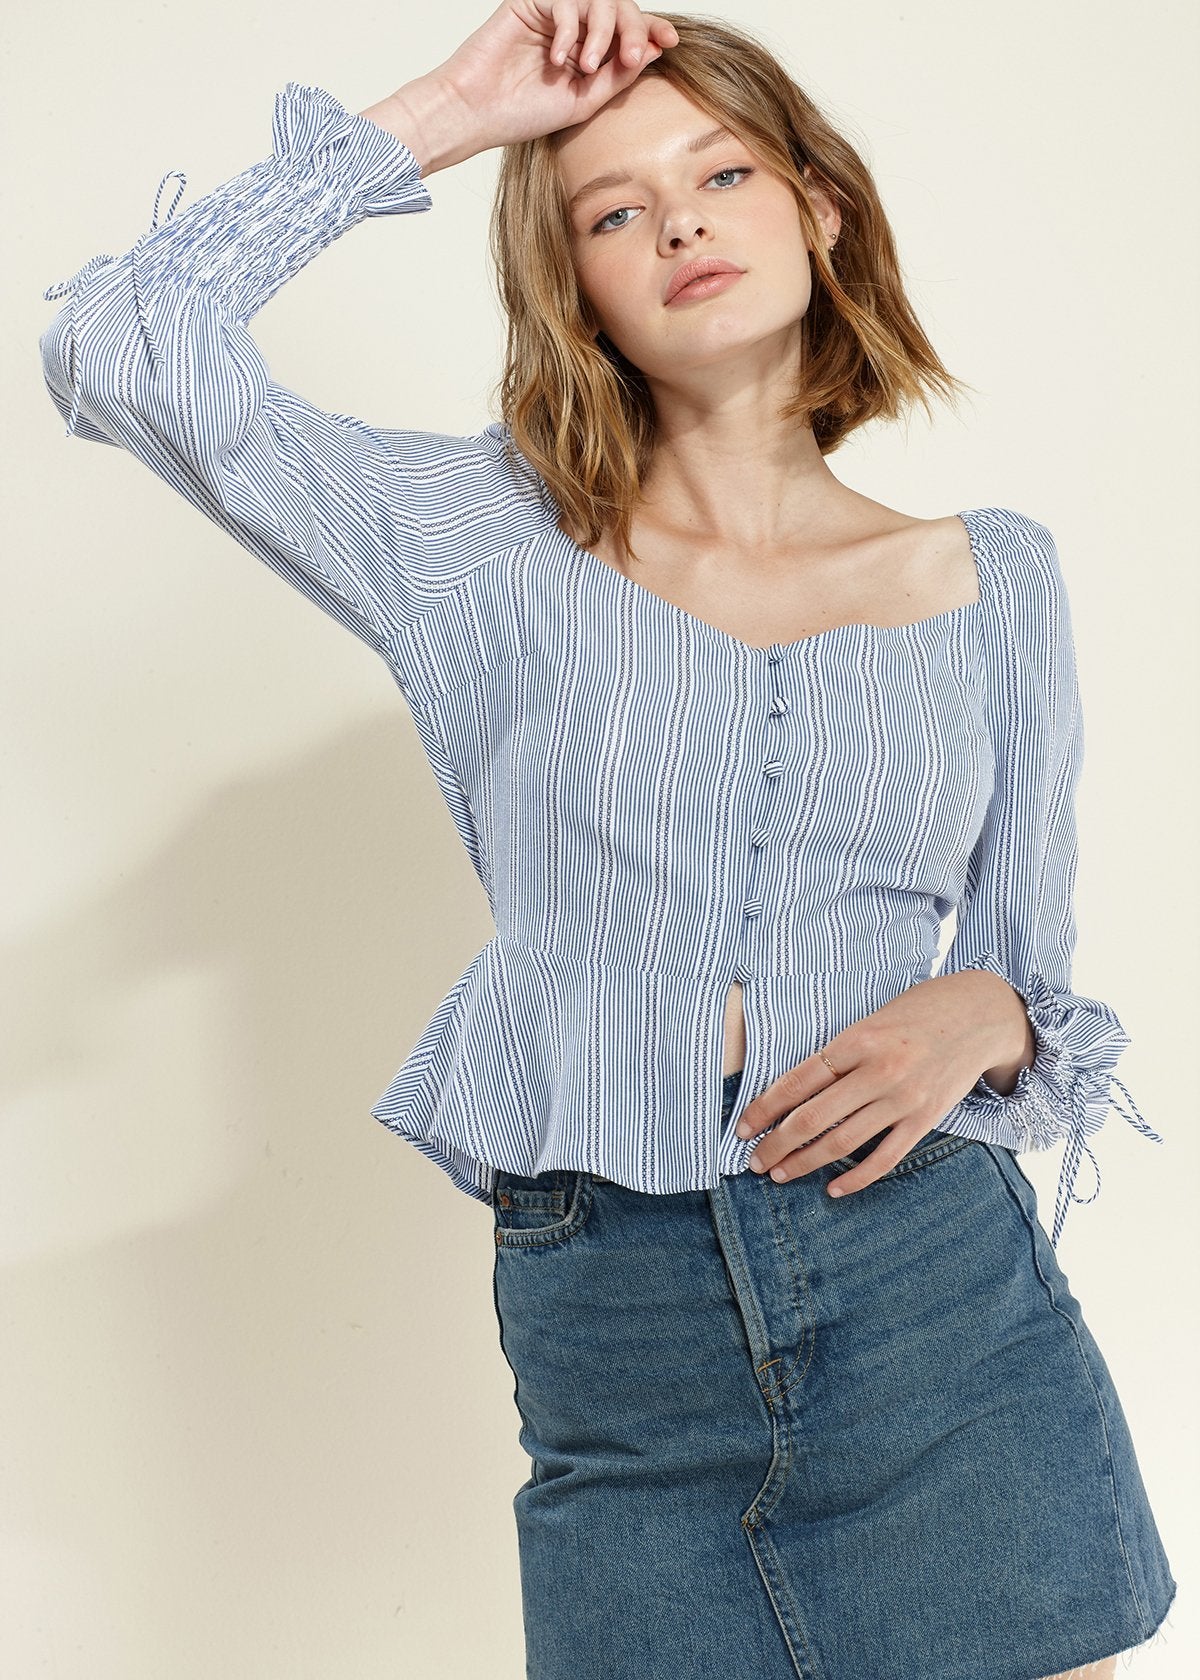 Blue Off-Shoulder Blouse' featuring a blouse in a vibrant blue color with an off-shoulder neckline, creating a chic and stylish look.